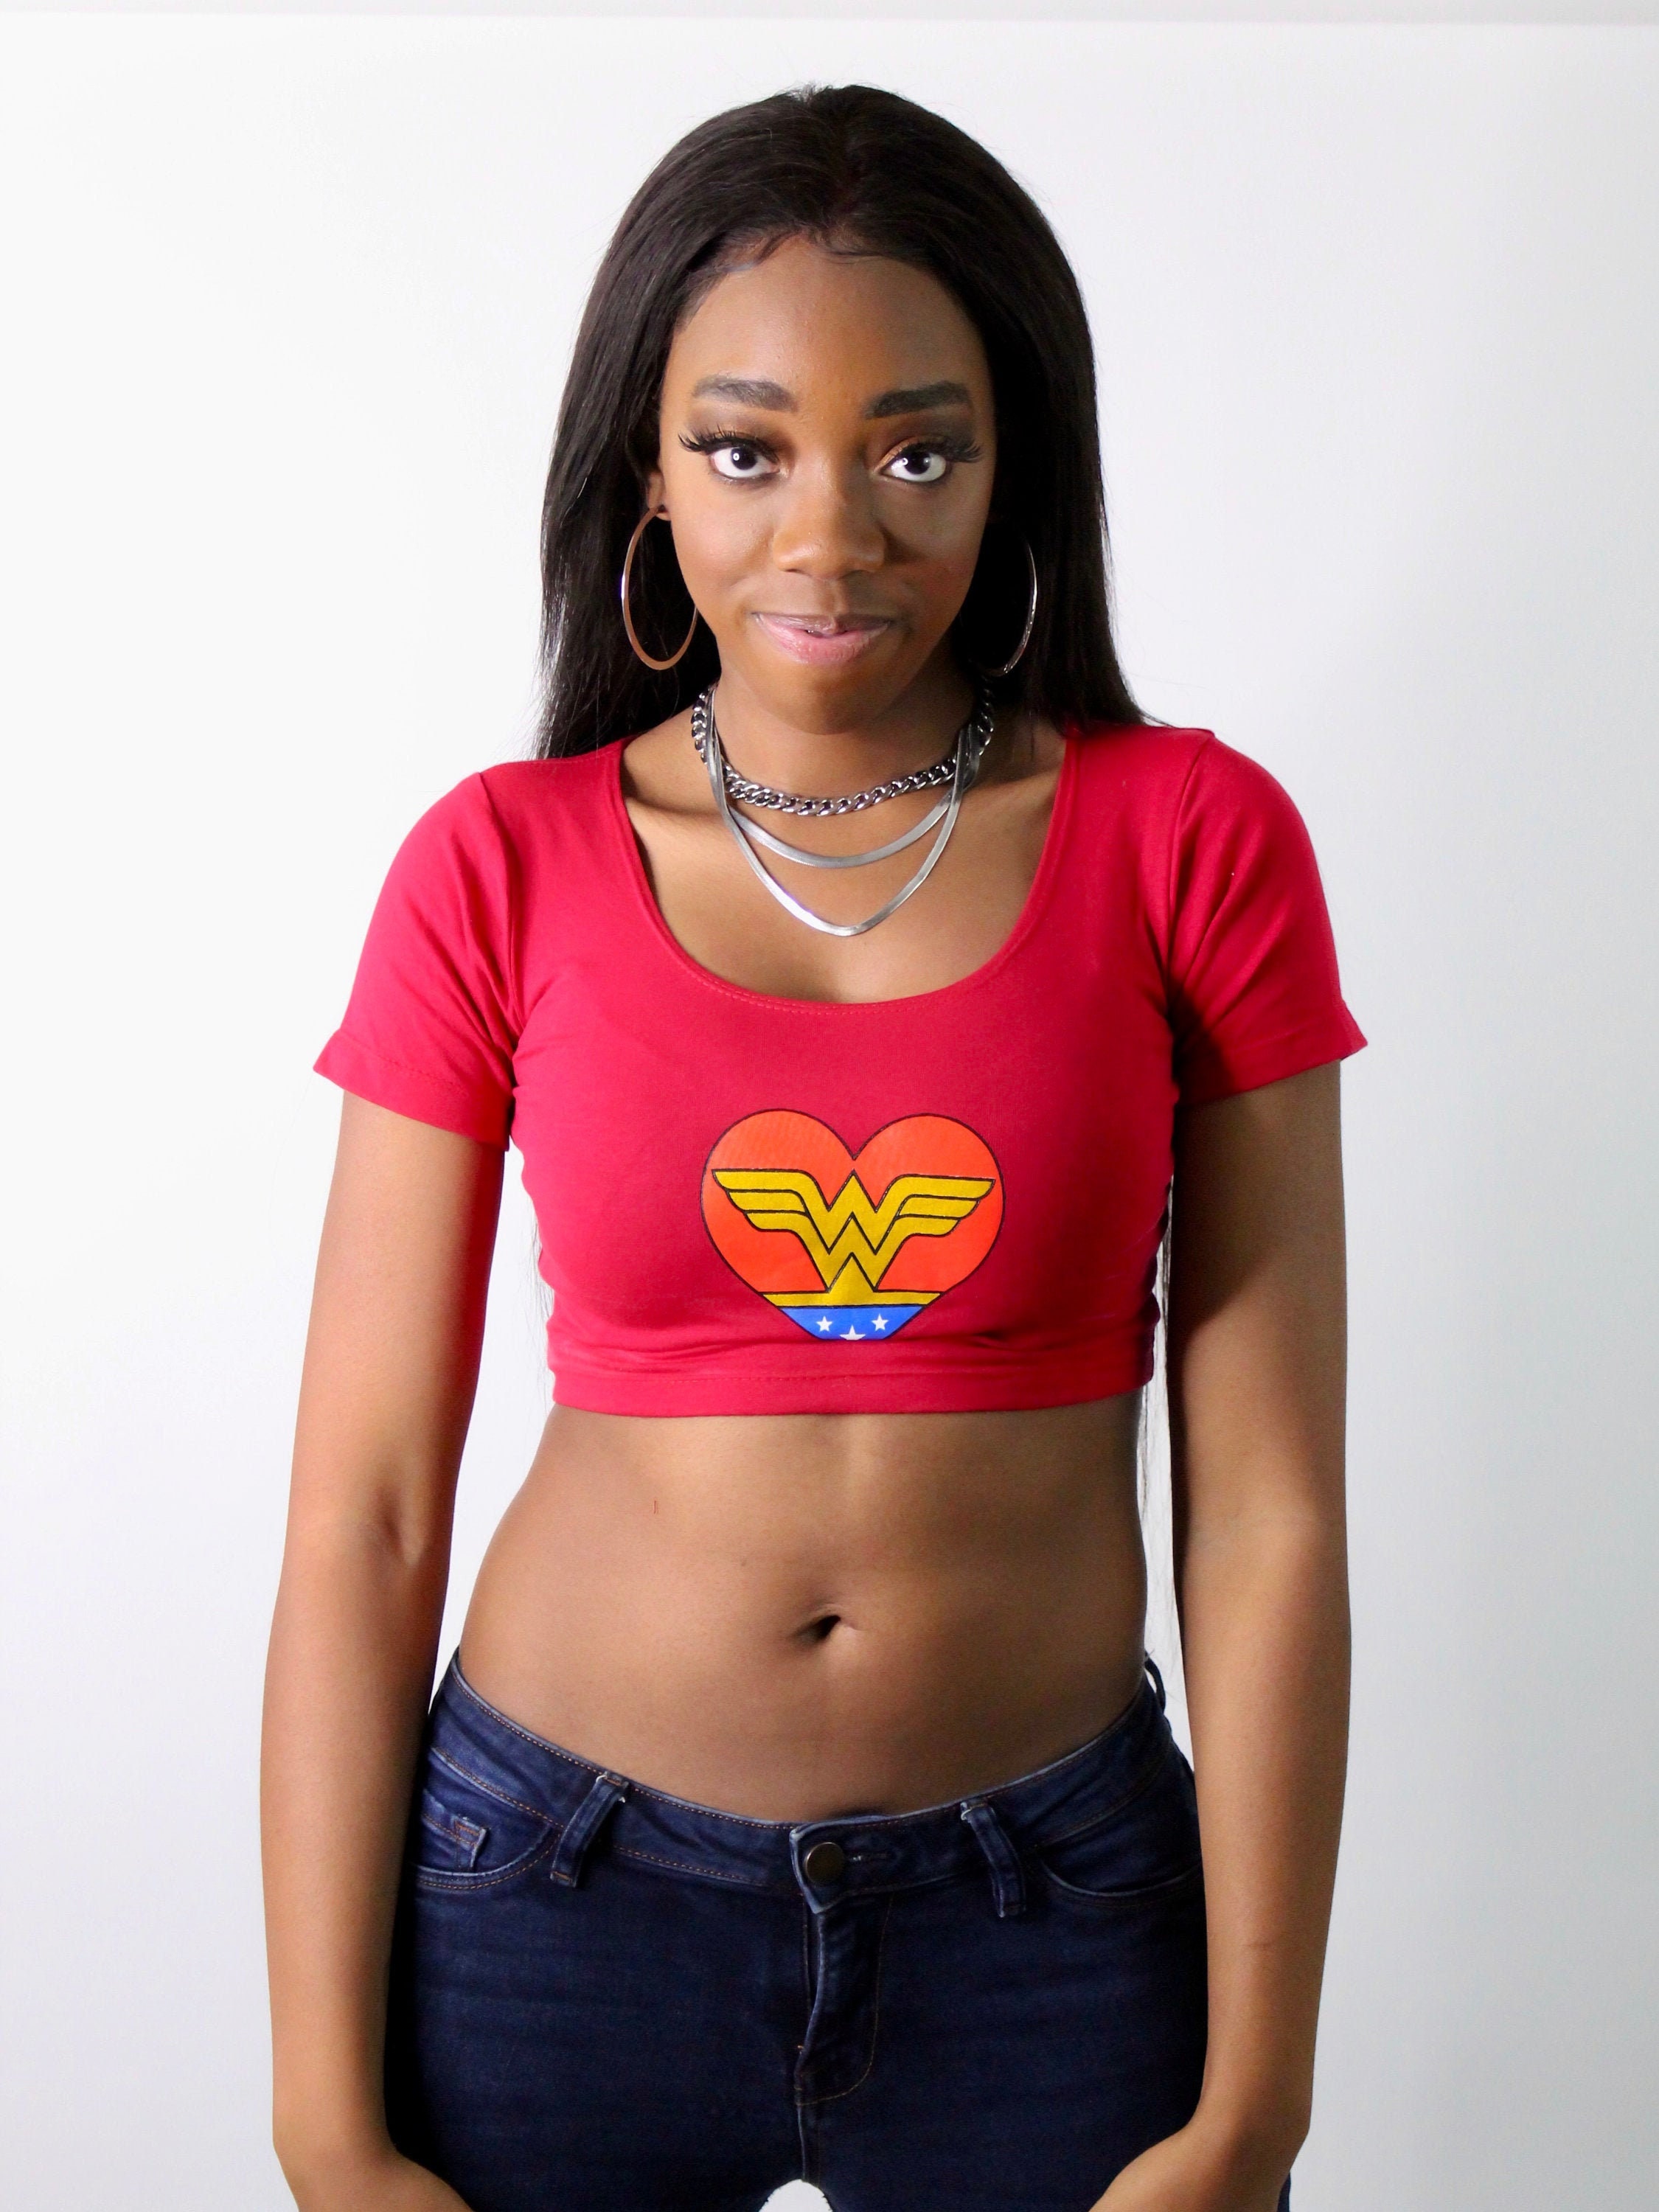 I Love Wonder Woman Red Short Sleeve Crop Top, Crop Tops for Women, Cropped  Top, Cosplay Costume, Heart, Sexy, Cropped Top Woman, Teens -  Ireland